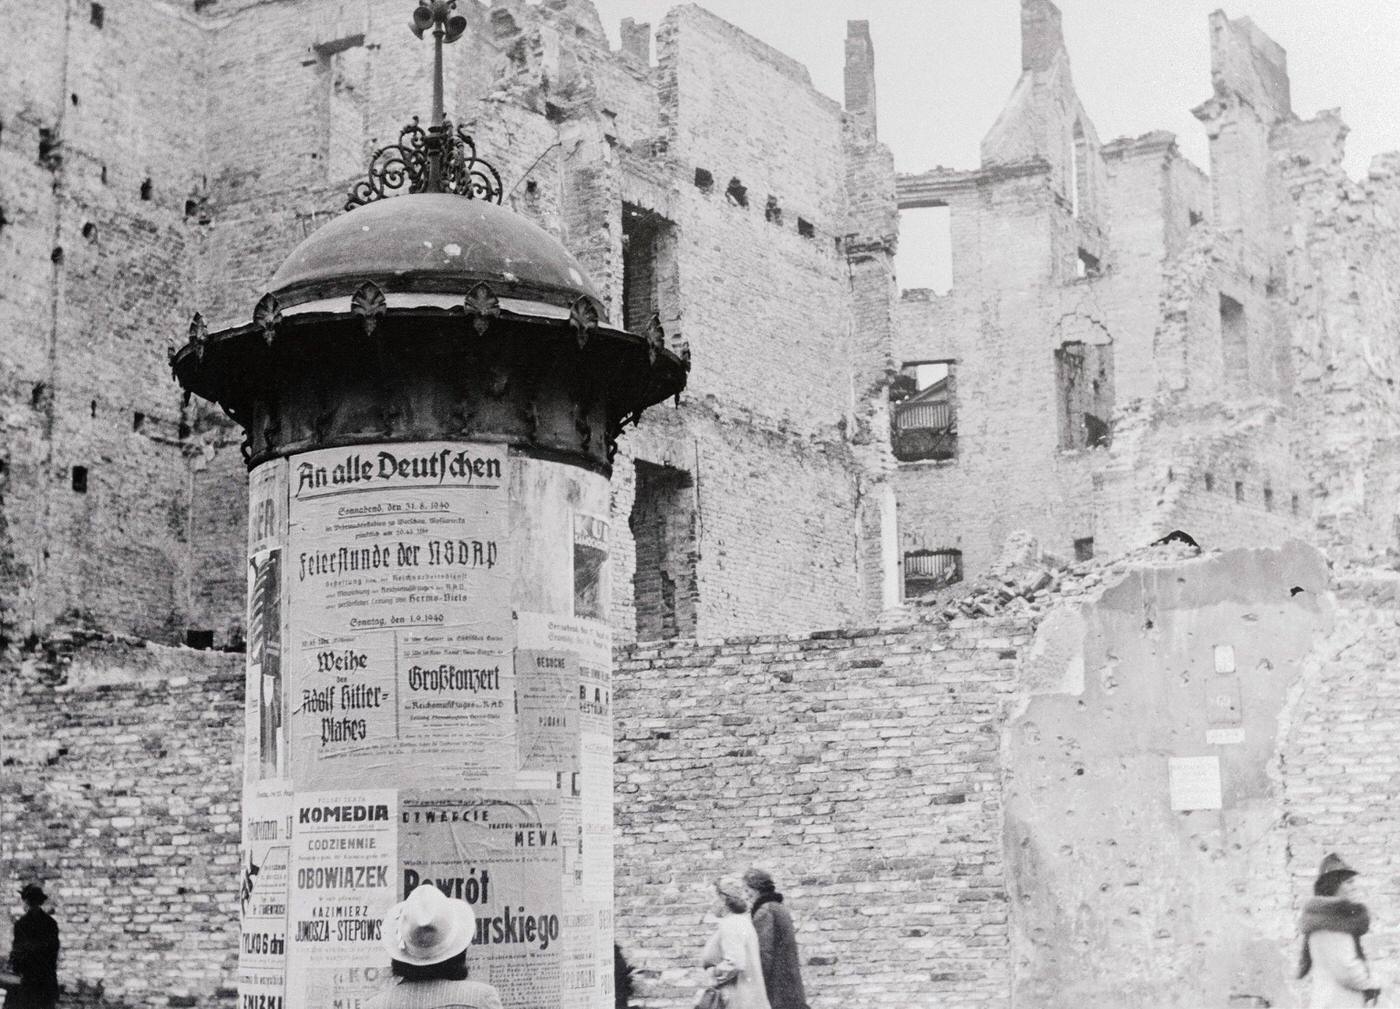 The "Poster" found among the ruins of Warsaw is written in German language and addressed to all Germans. It extends an invitation to a celebration organized by the Nazi party.